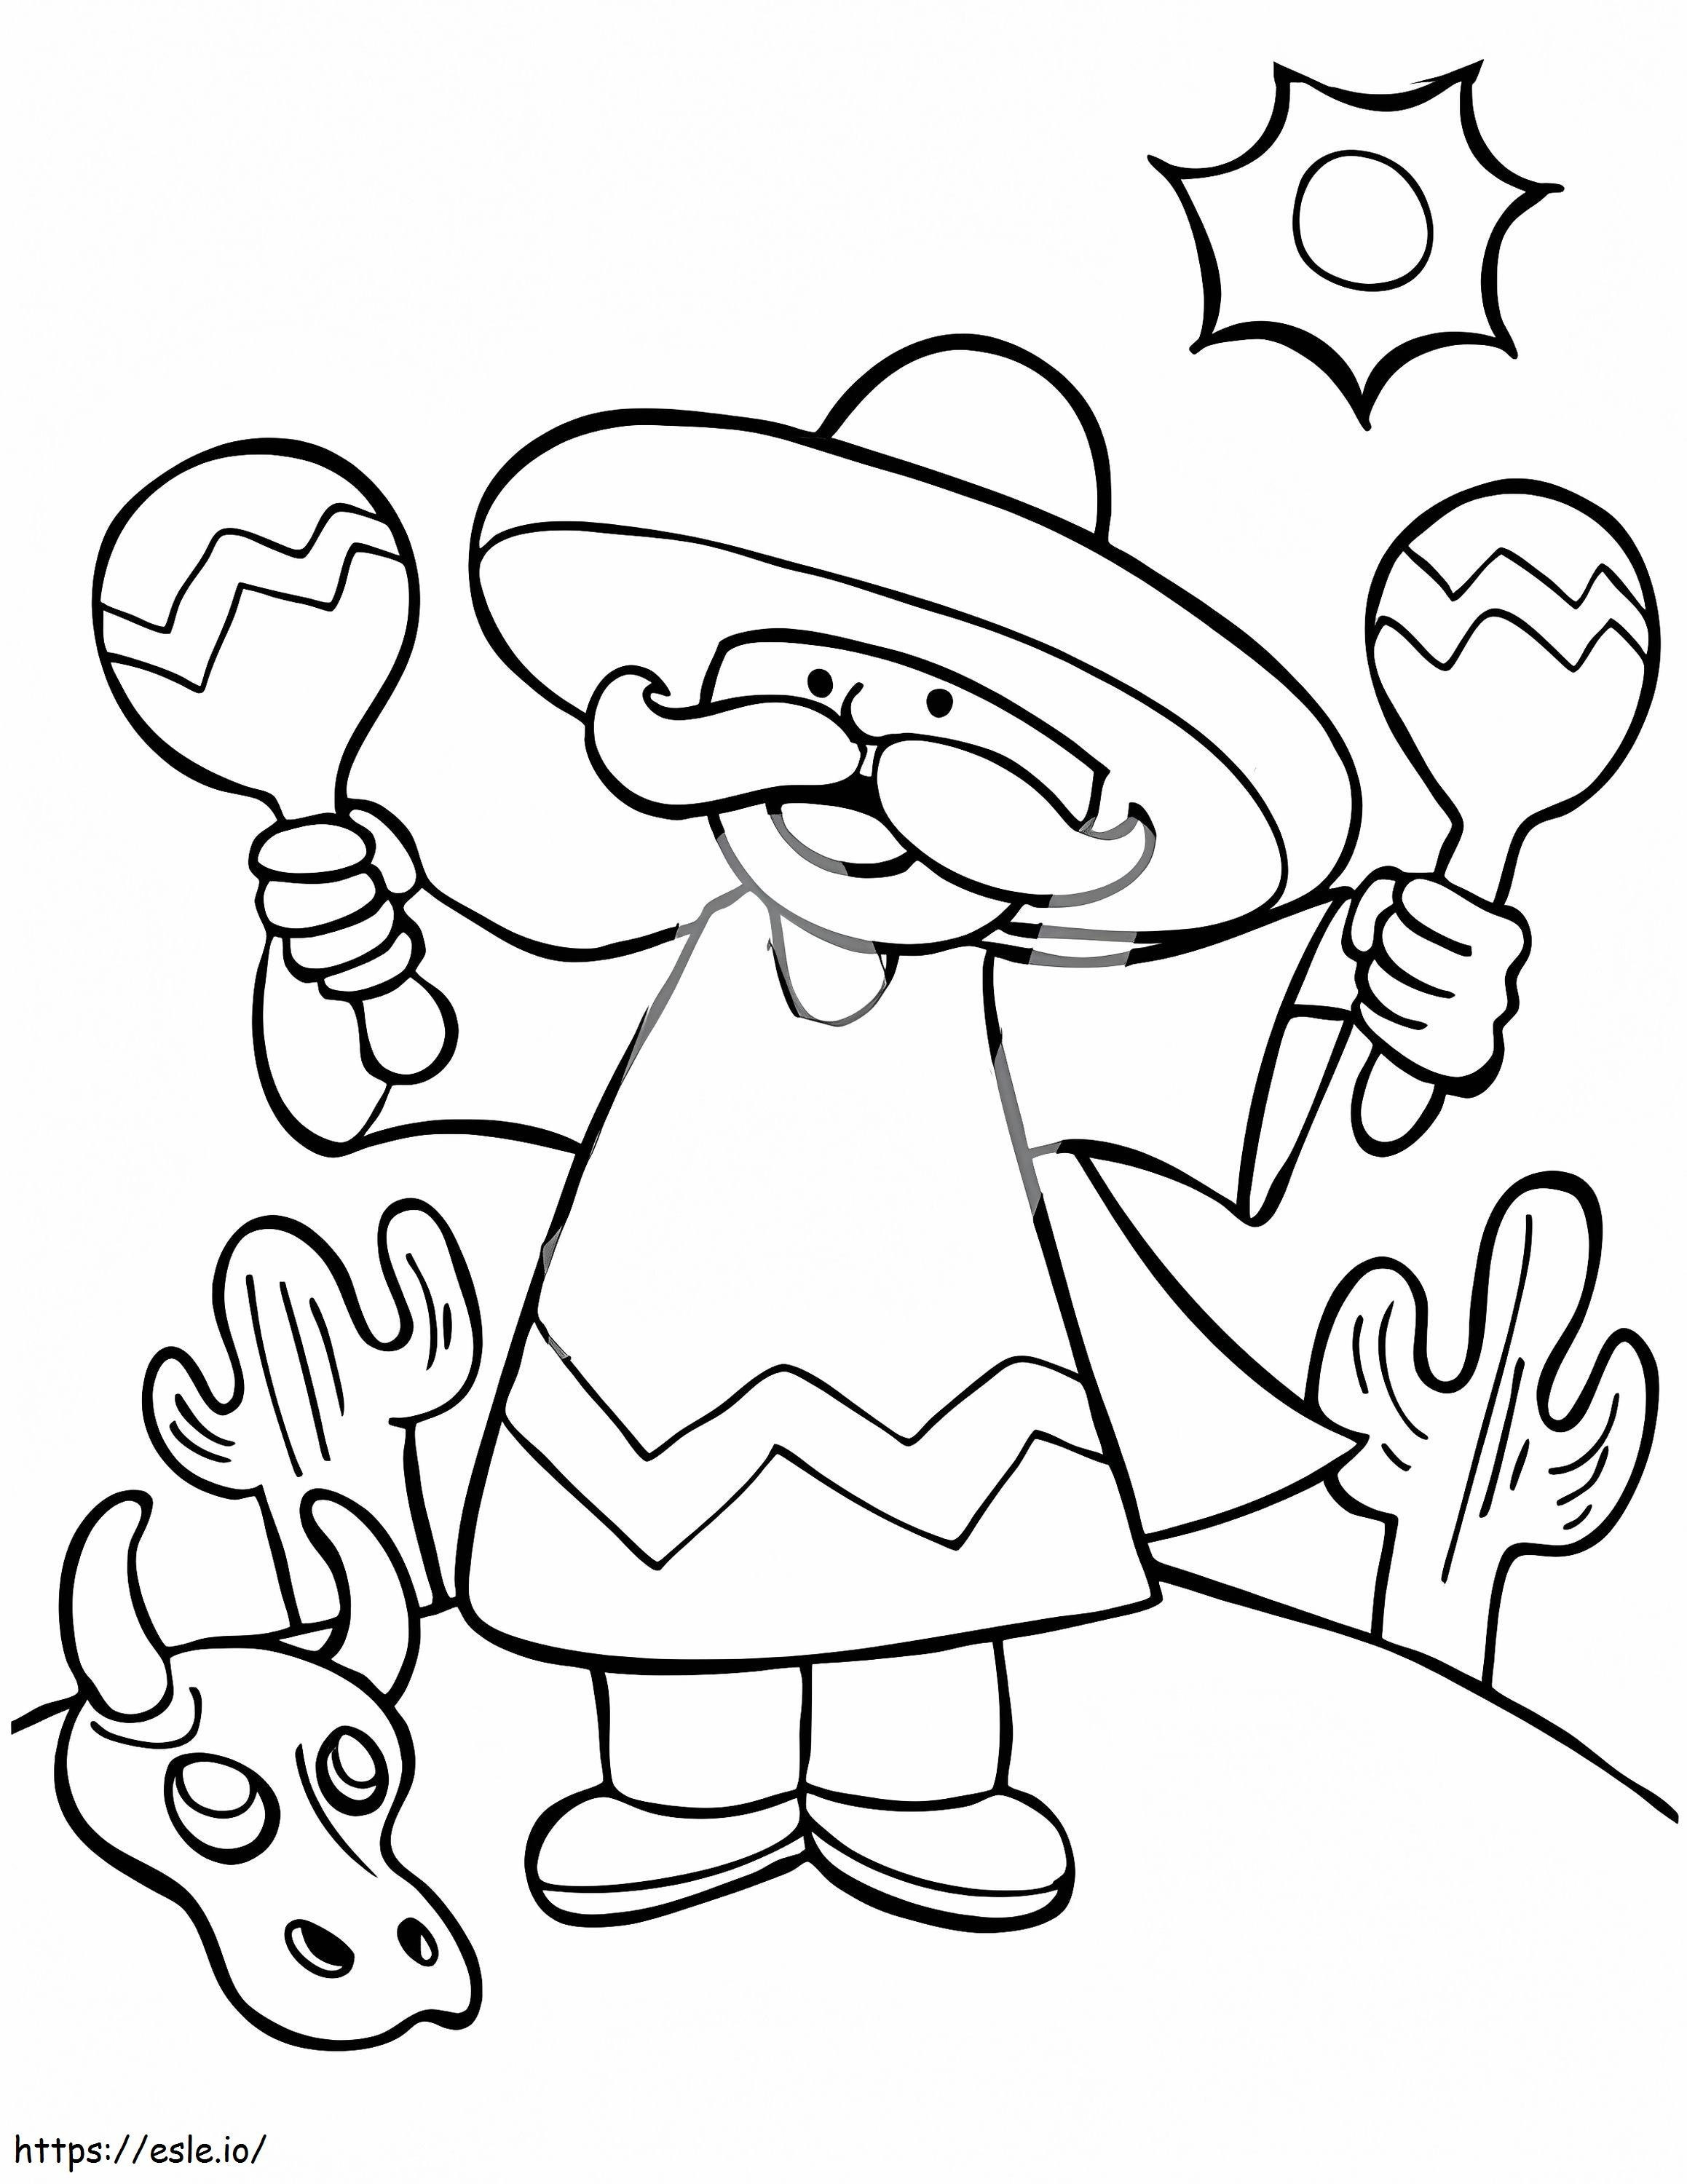 Mexican Man Playing Maracas coloring page